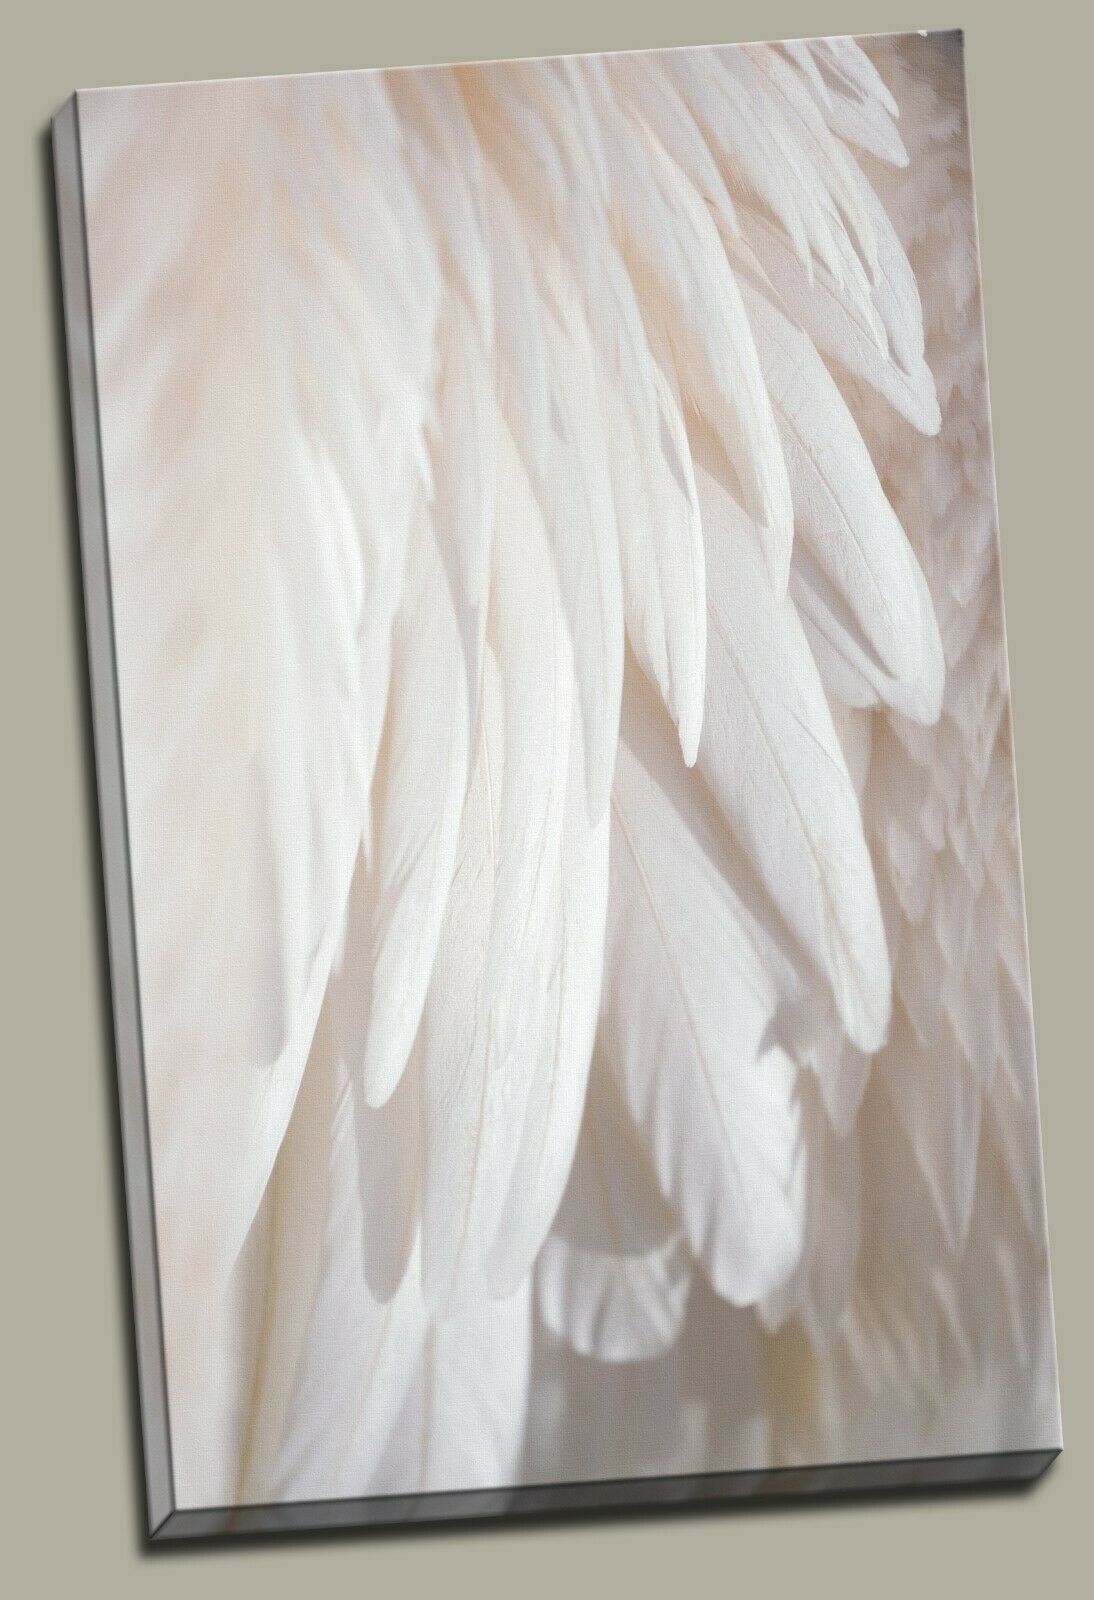 You are my Angel Feather Wing Framed Canvas Prints Modern Wall Art Home Decor